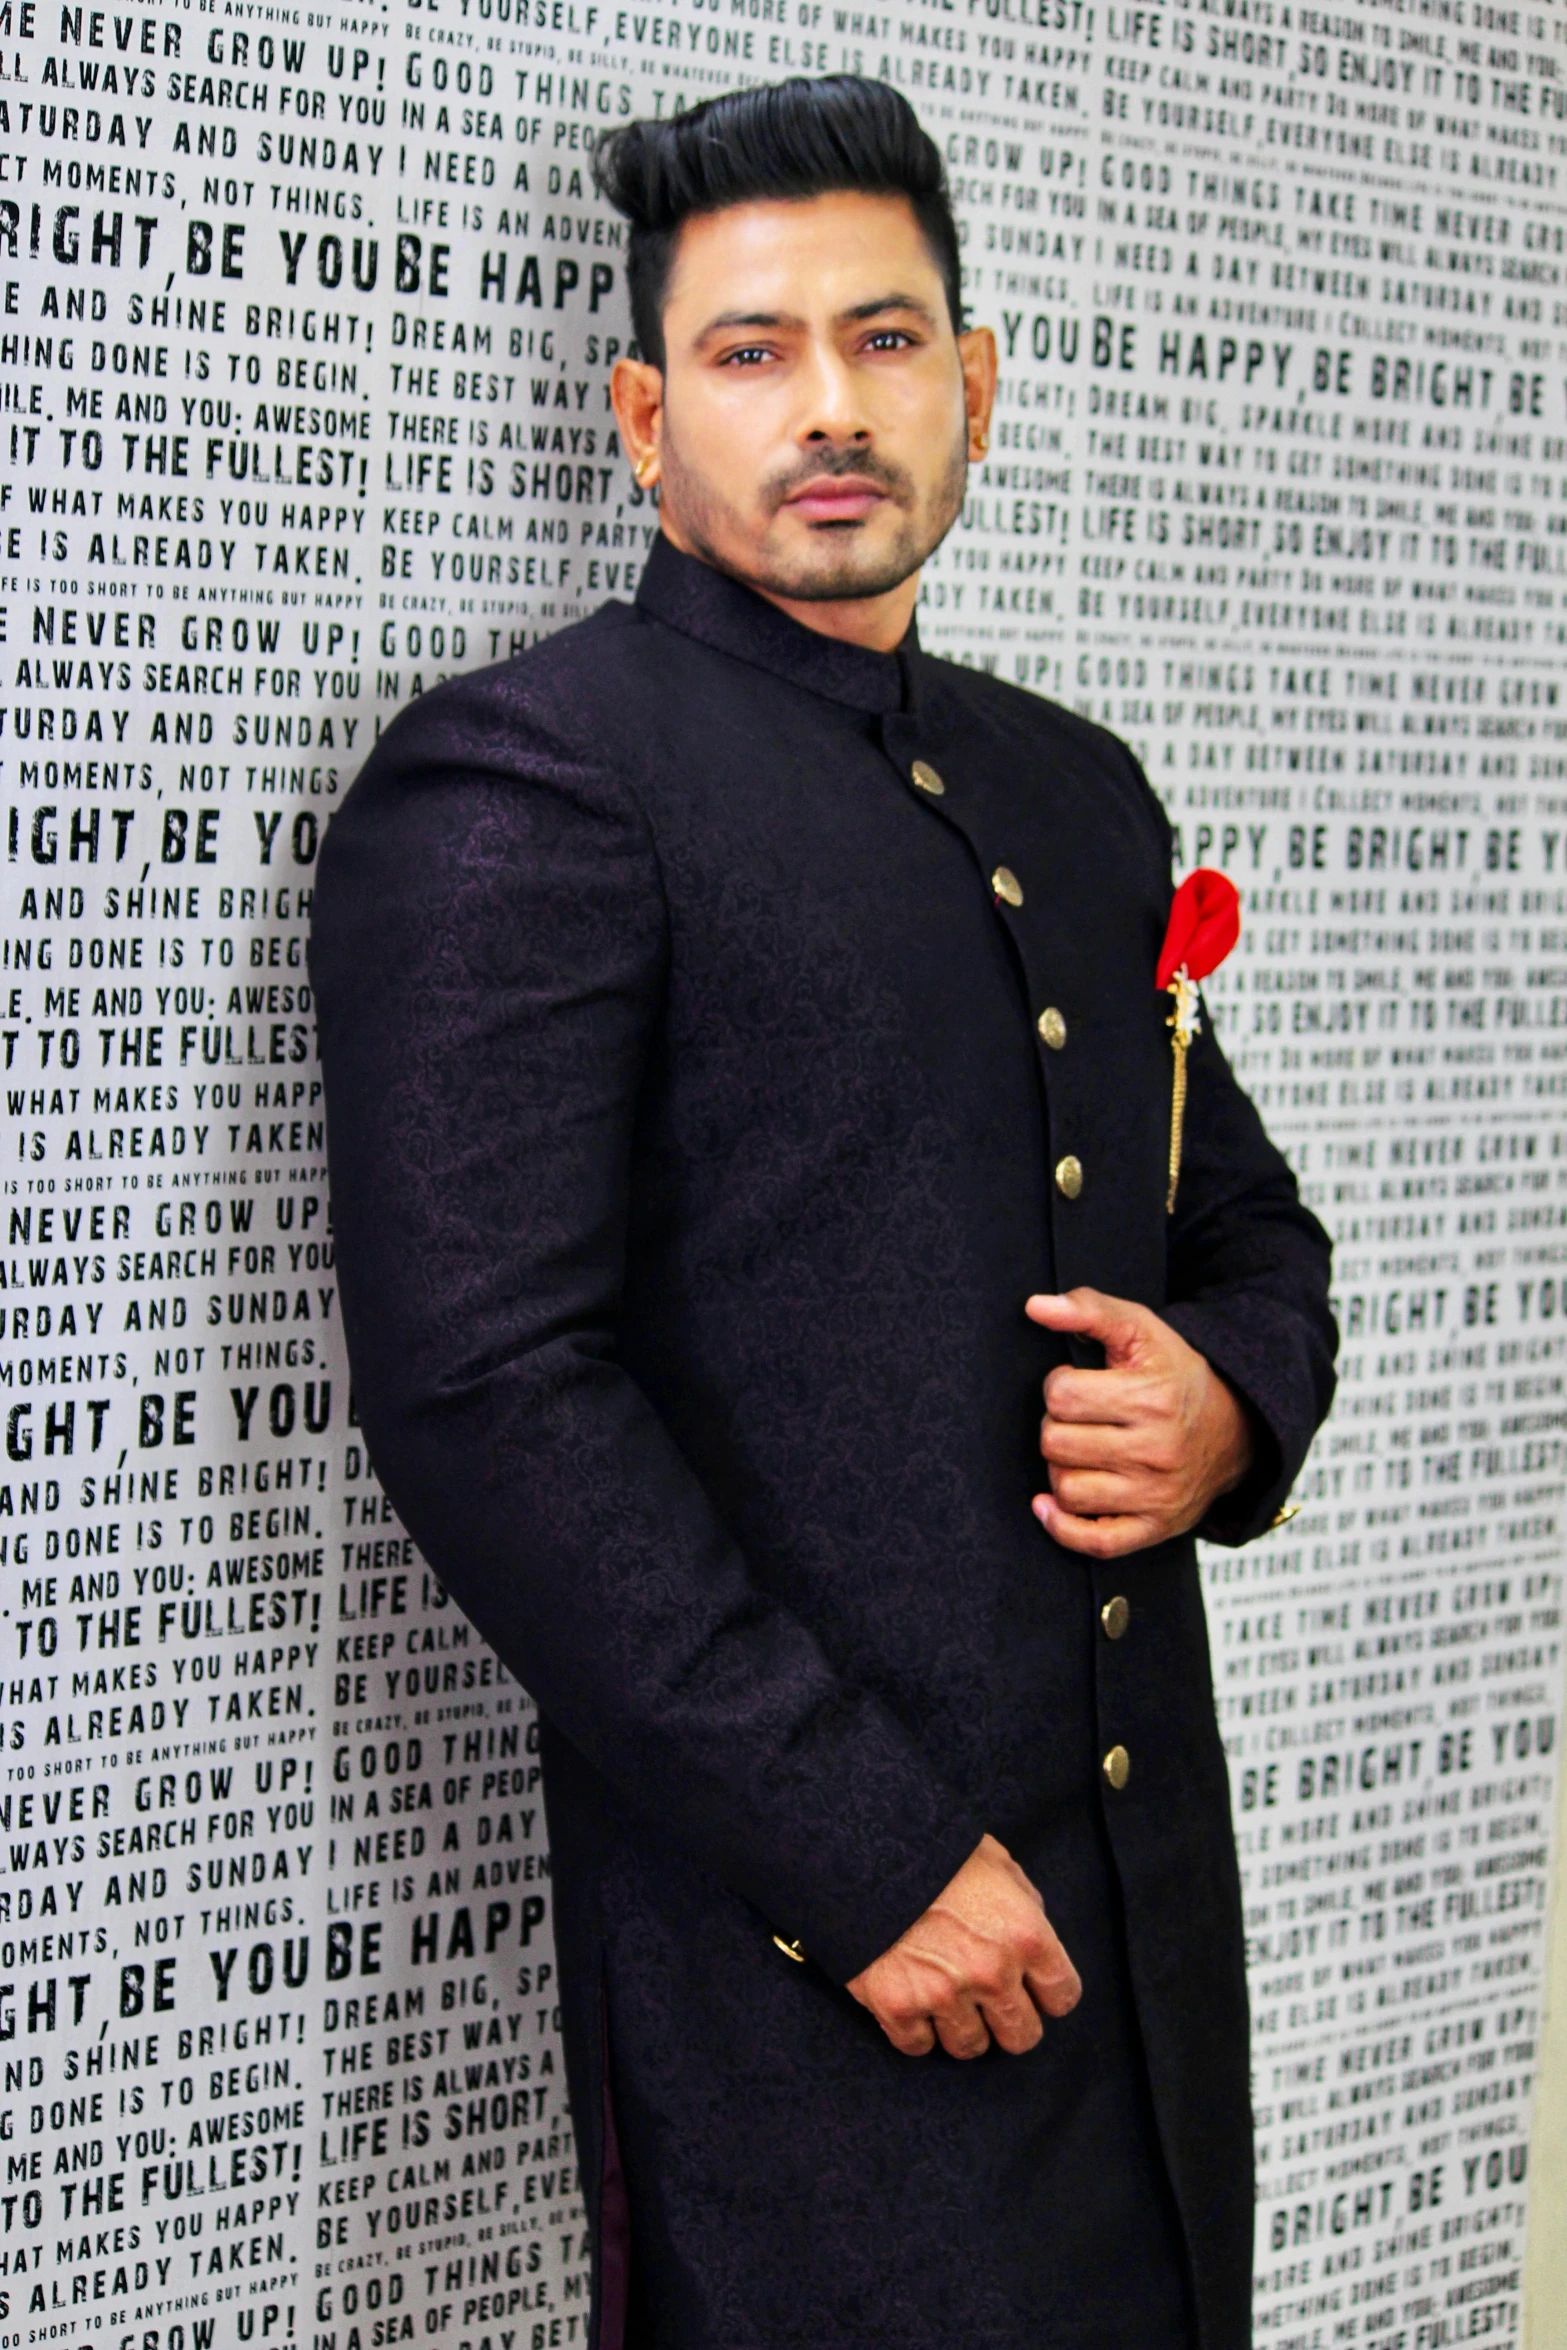 a man standing in front of a wall with a rose in his hand, an album cover, inspired by Saurabh Jethani, wearing a black noble suit, pout, with mustache, masculine appeal high fashion